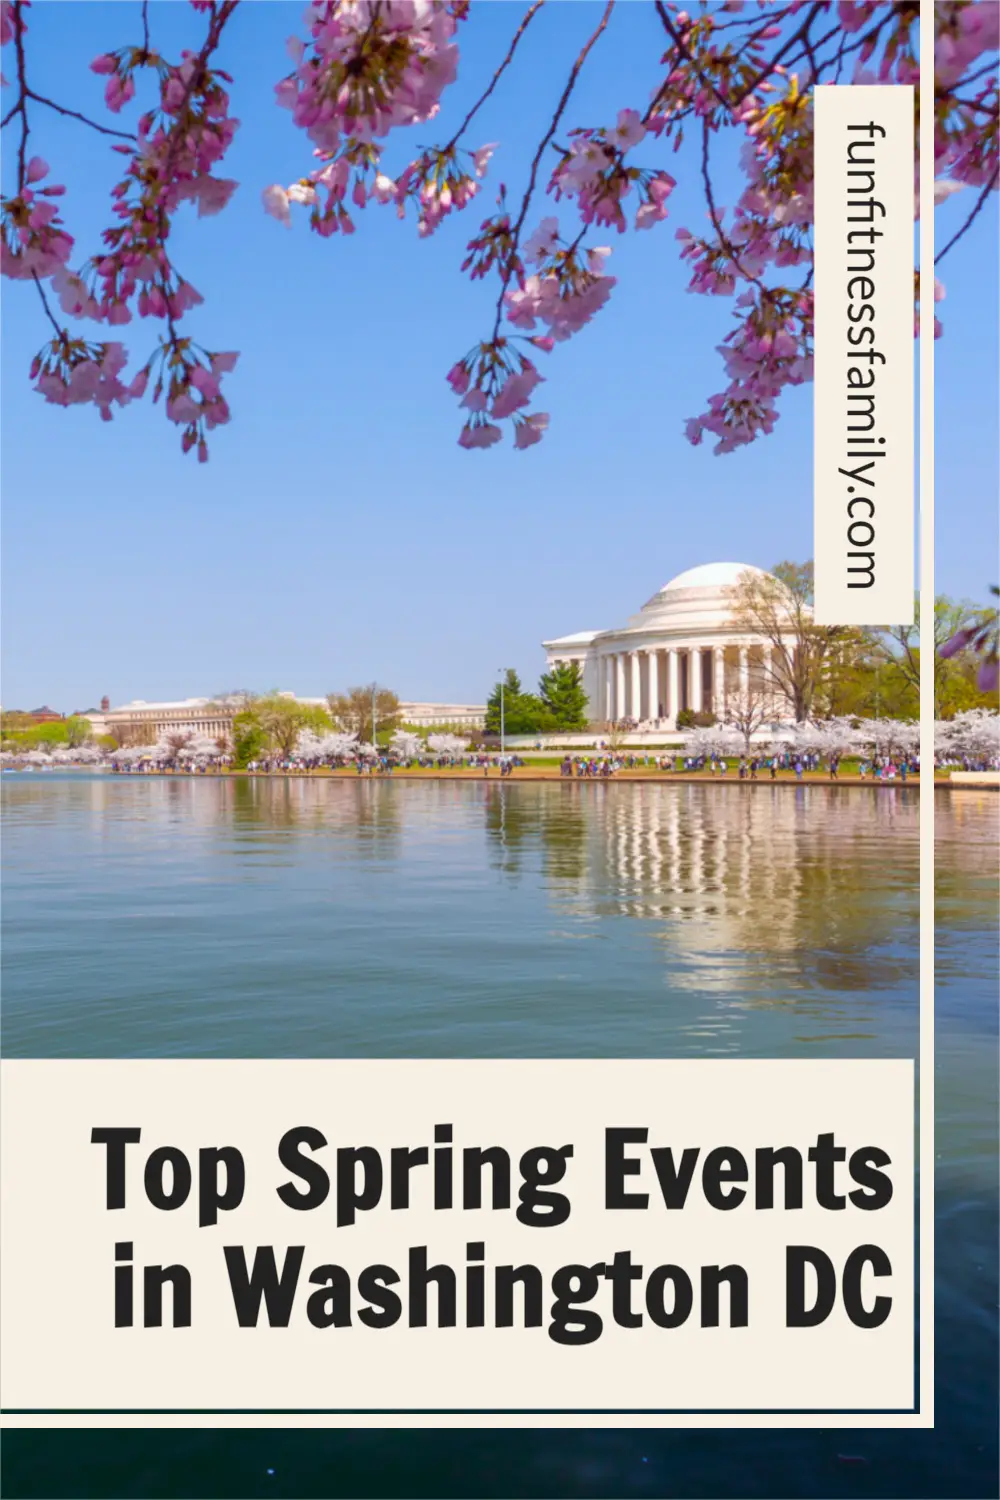 Check out our list of family-friendly spring events in Washington D.C. this year! #familytravel #washingtondc #springevents #ustravel #uscities